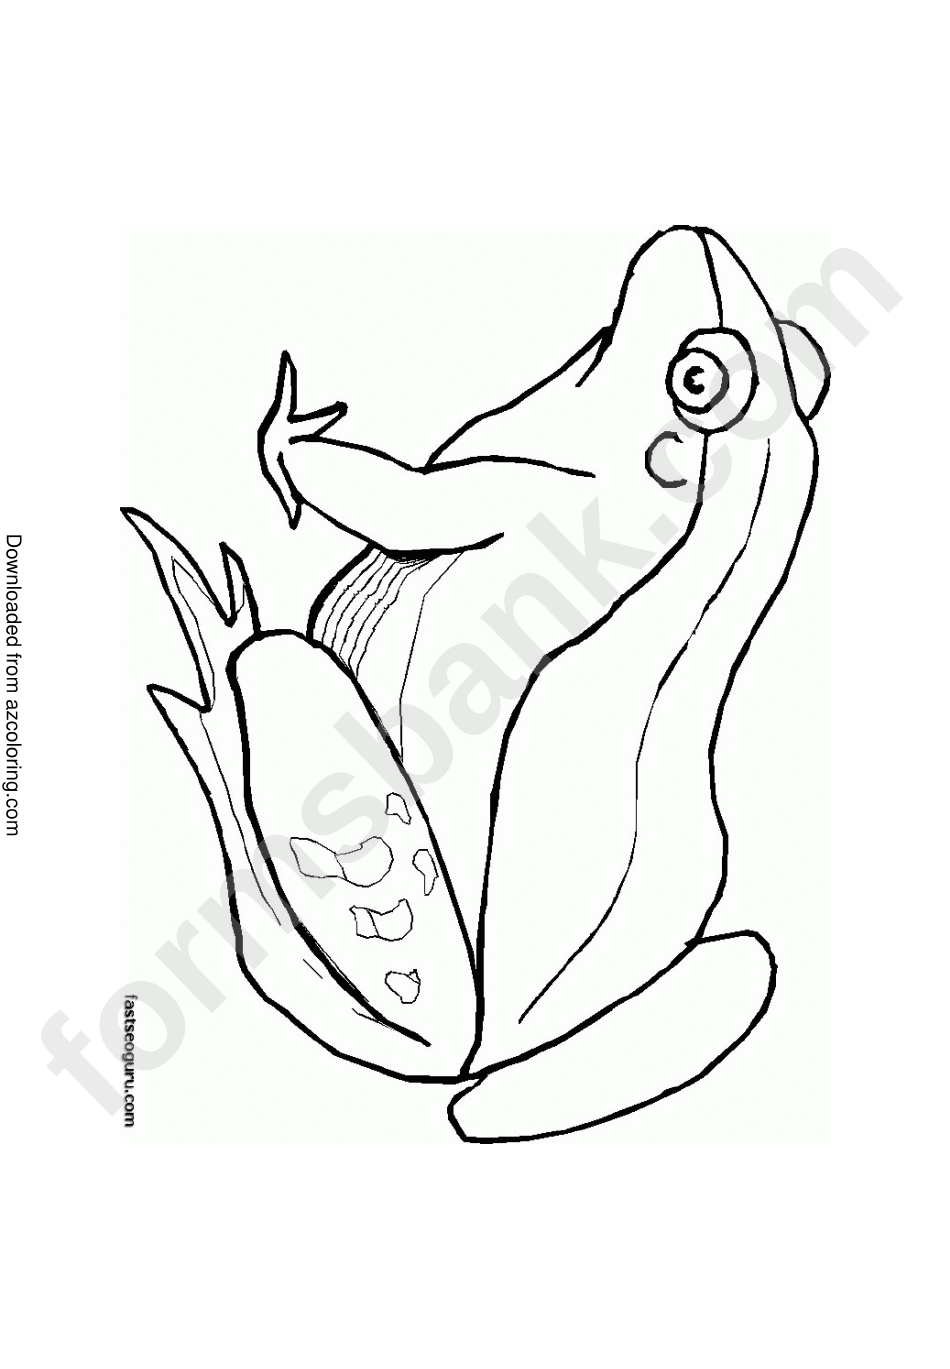 Jungle Animals Coloring Page - Frog